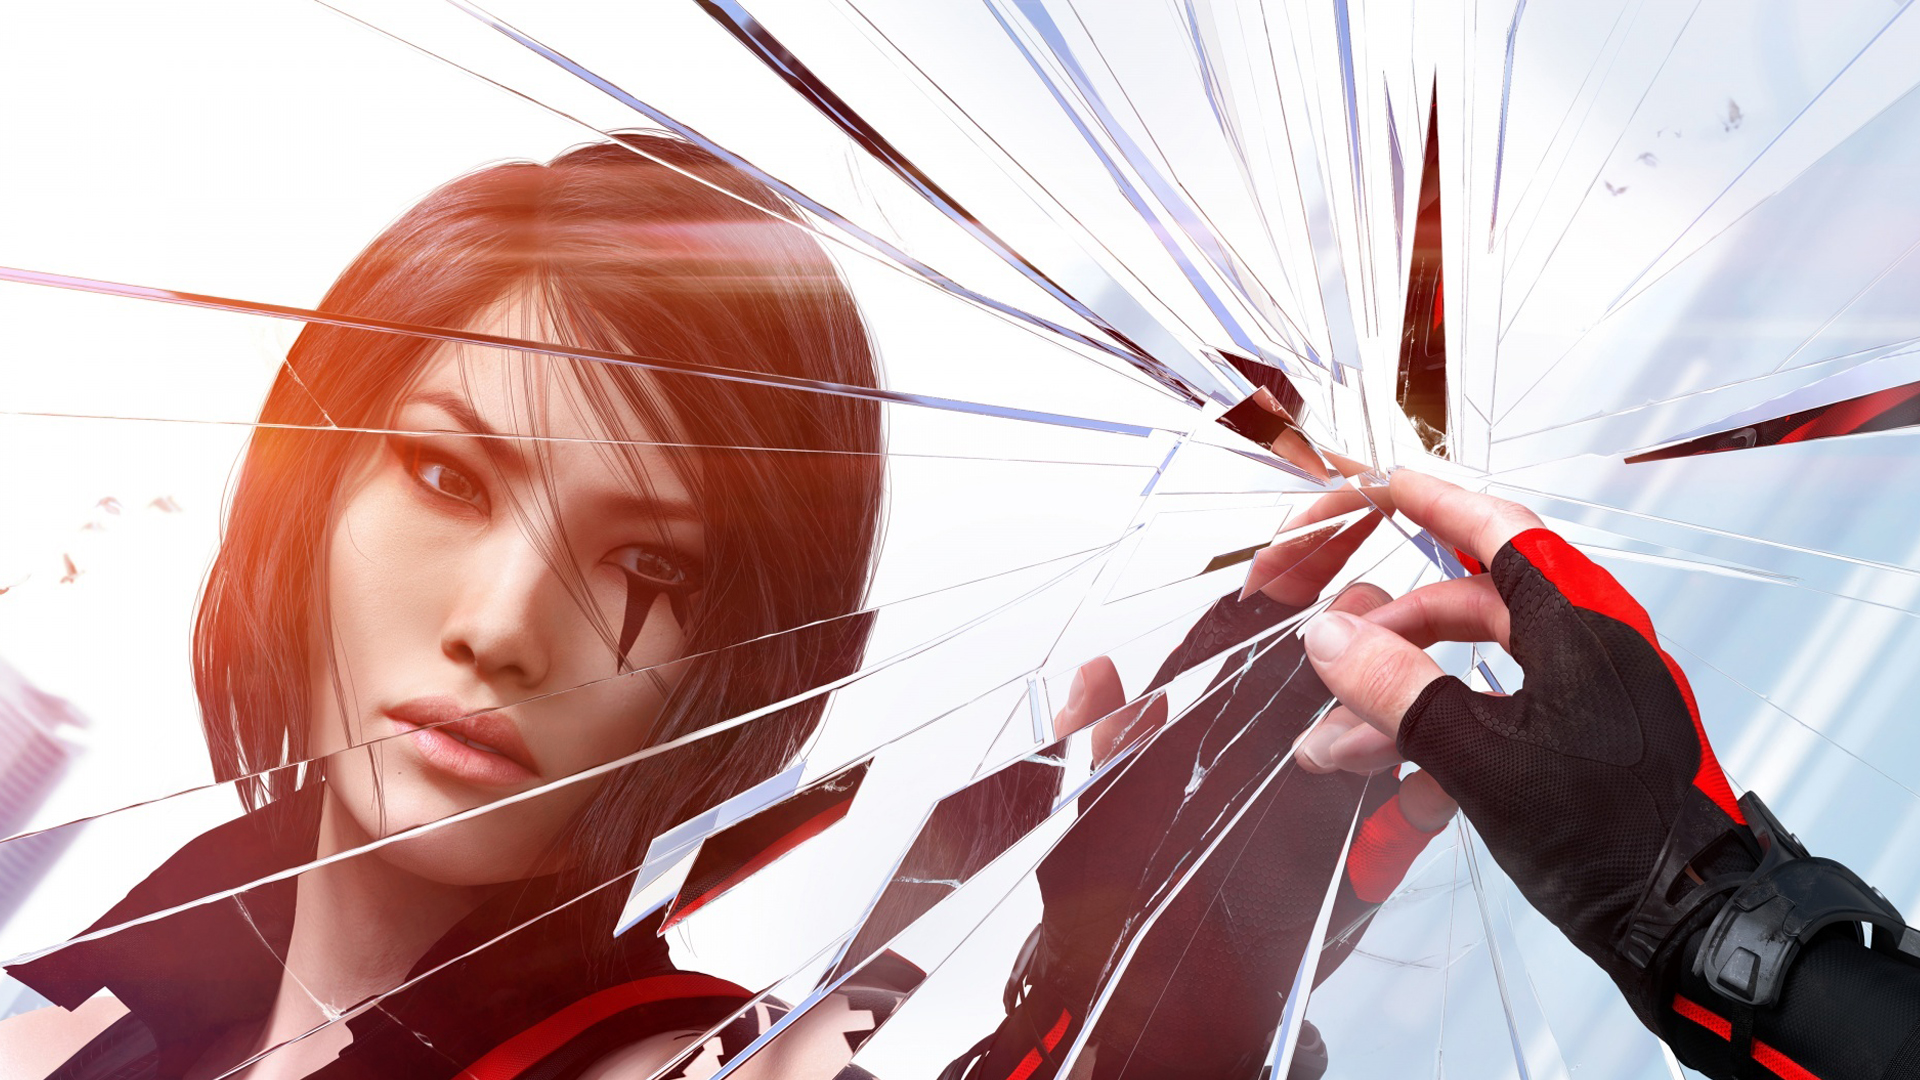 General 1920x1080 Mirror's Edge Catalyst parkour Faith Connors Mirror's Edge video game girls reflection glass broken glass video game art dice Electronic Arts video games PC gaming face women